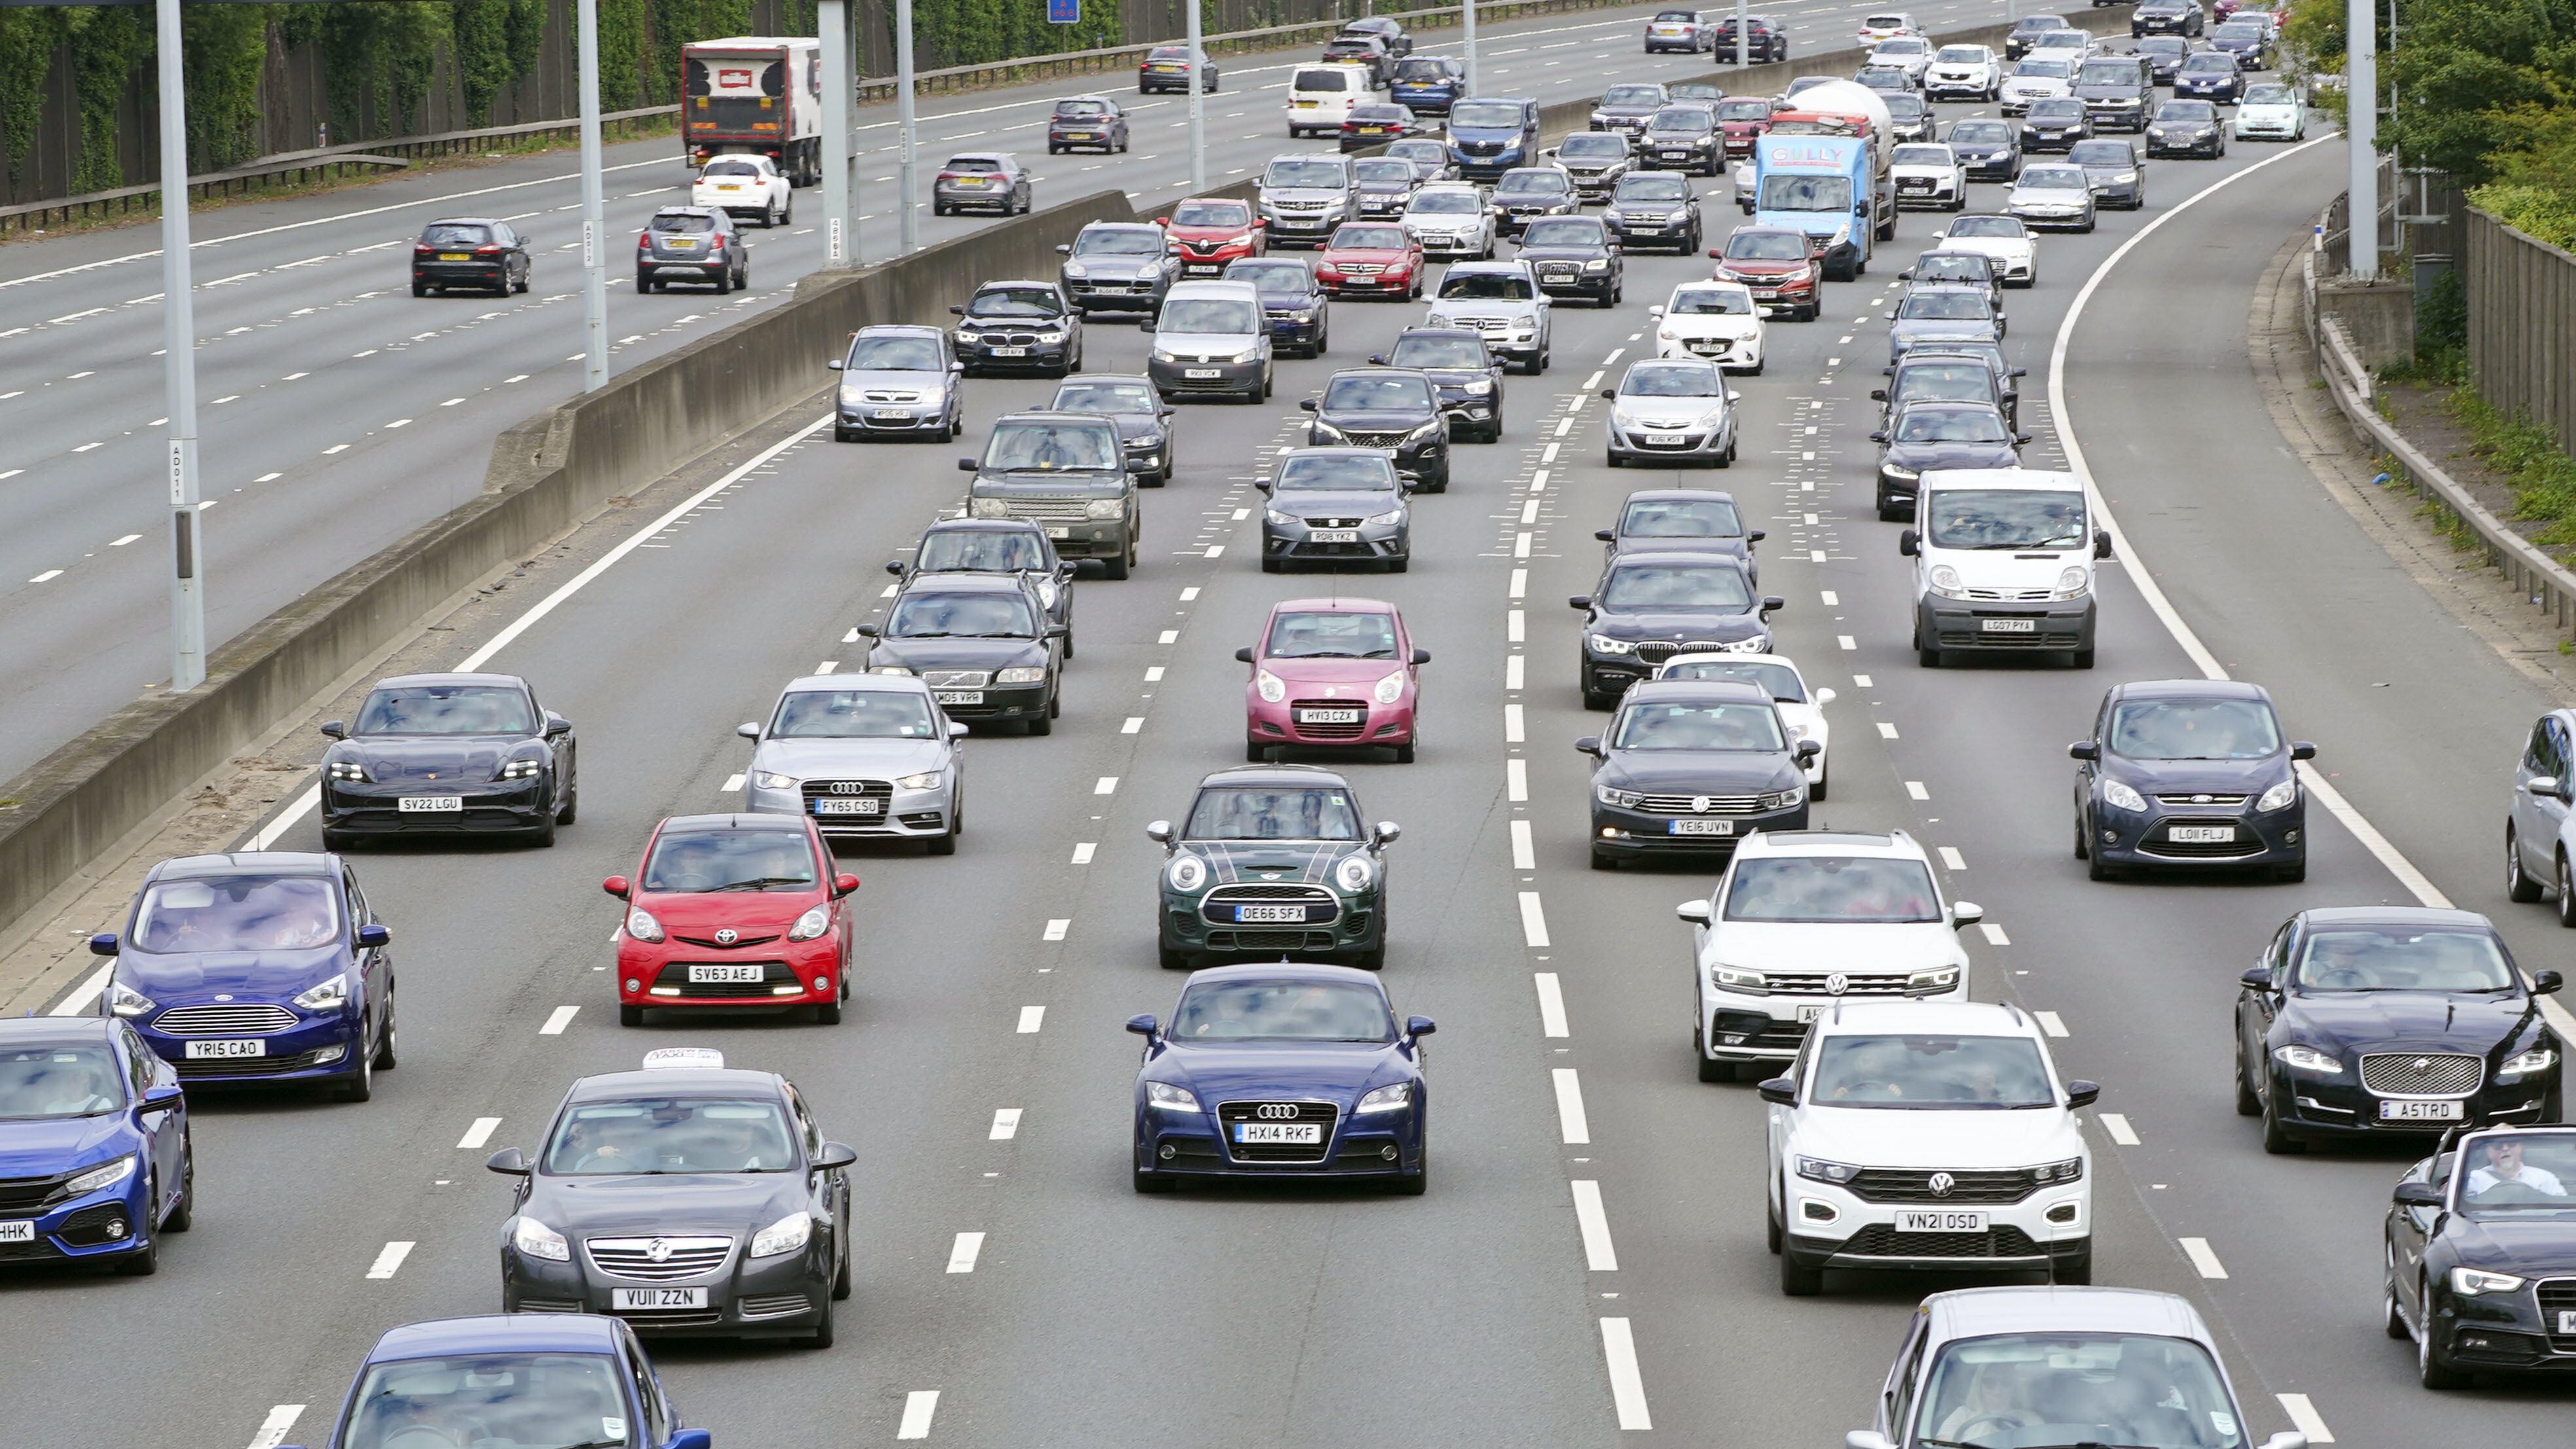 Vehicles queue on the M25 motorway near Egham, Surrey, on day two of the Platinum Jubilee celebrations. Picture date: Friday June 3, 2022.